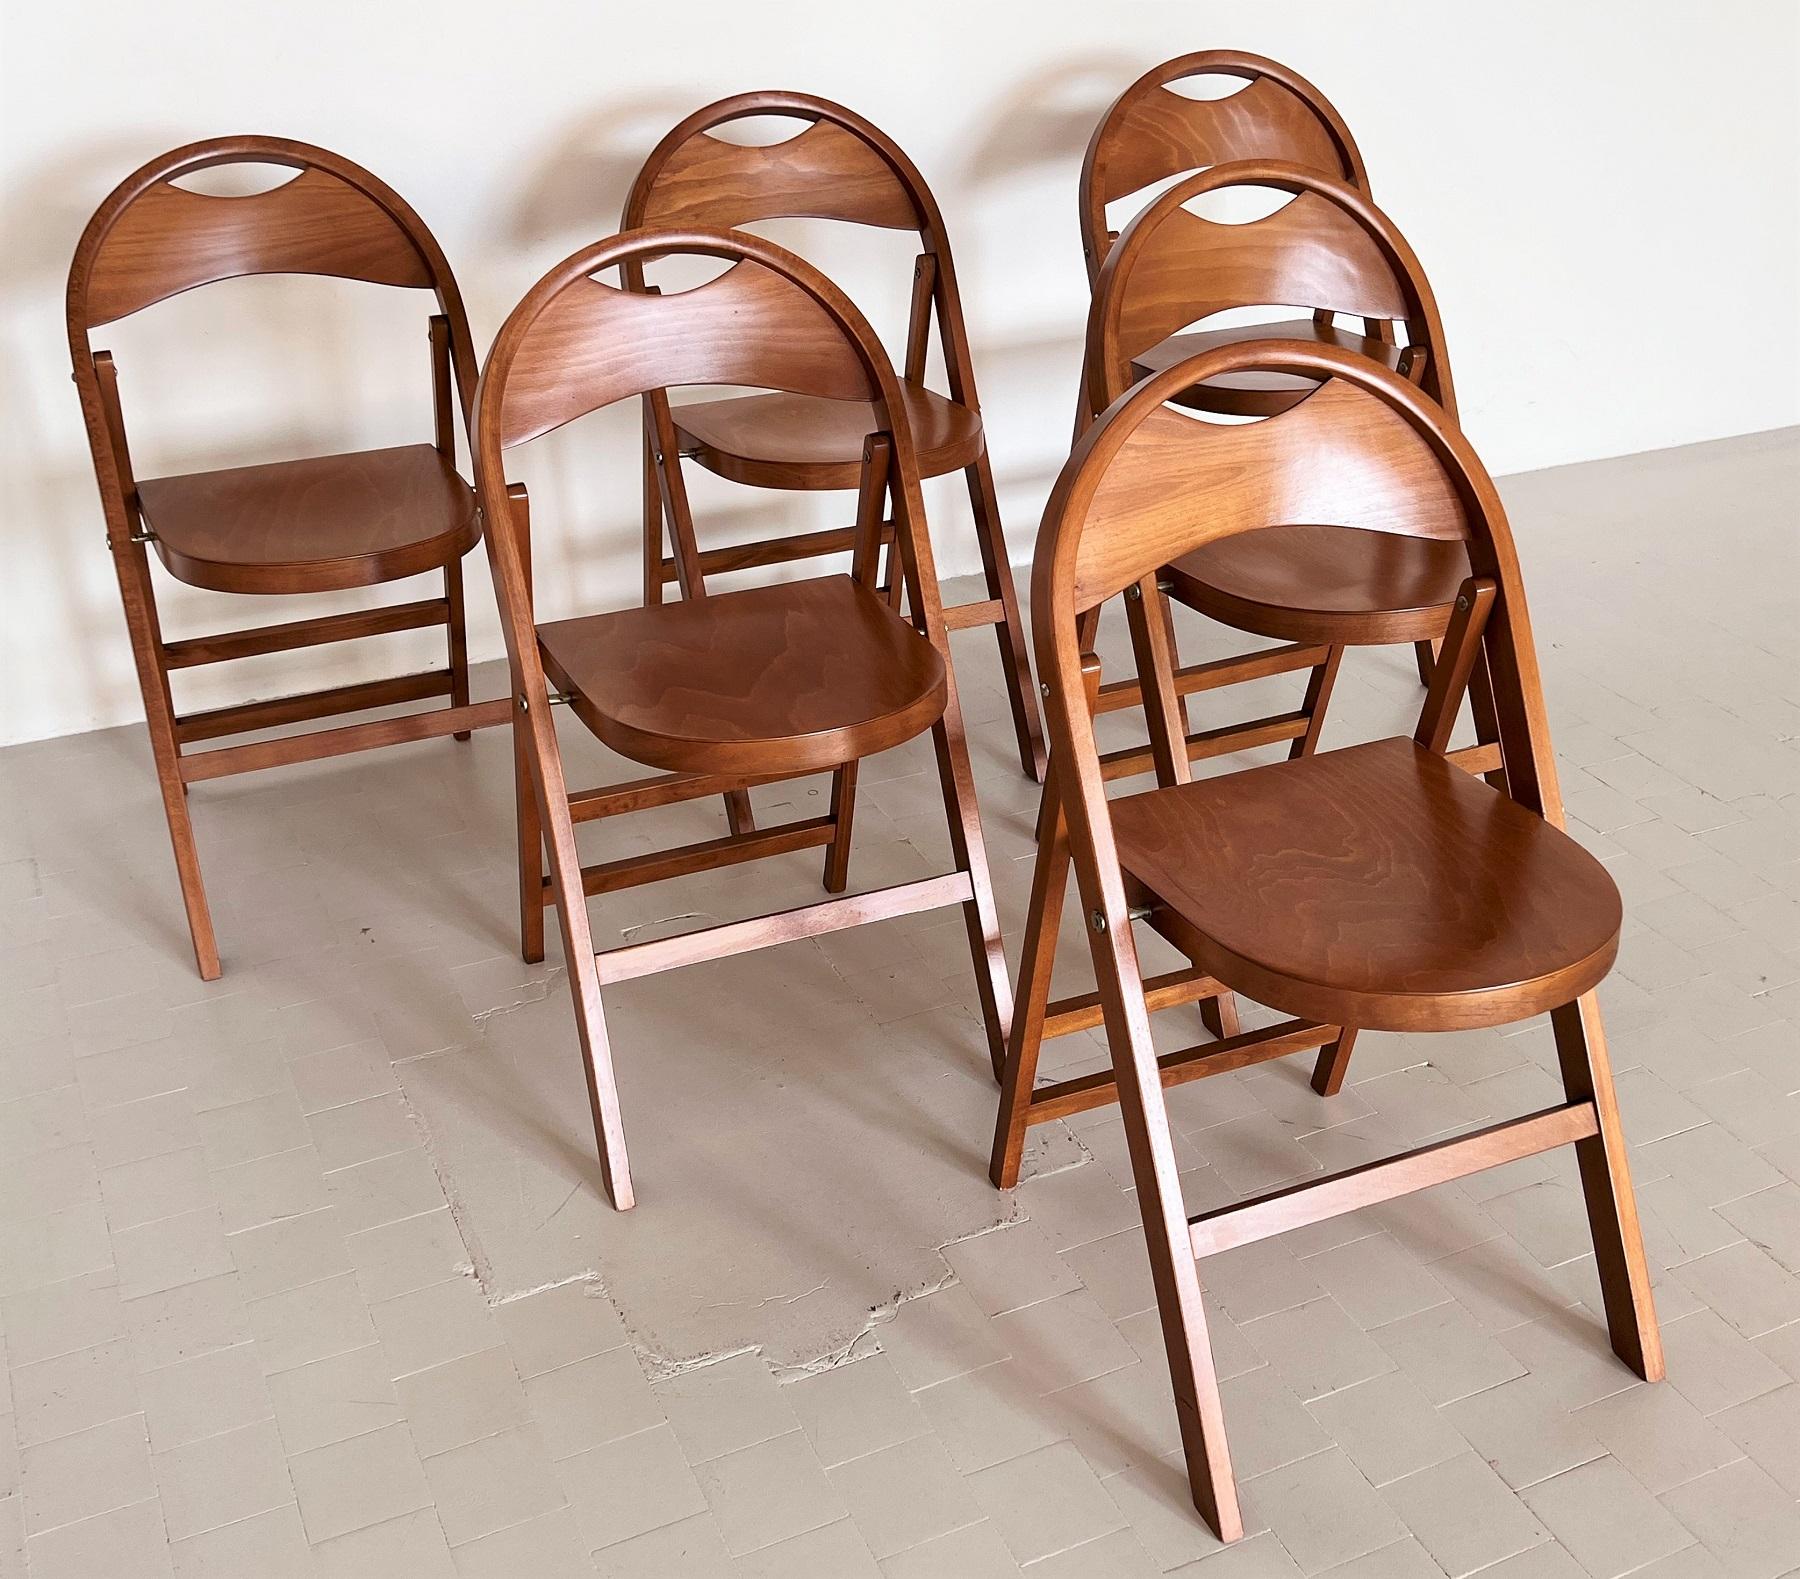 20th Century Folding Chairs TRIC by Achille Castiglioni for BBB Emme Bonacina, 1960s